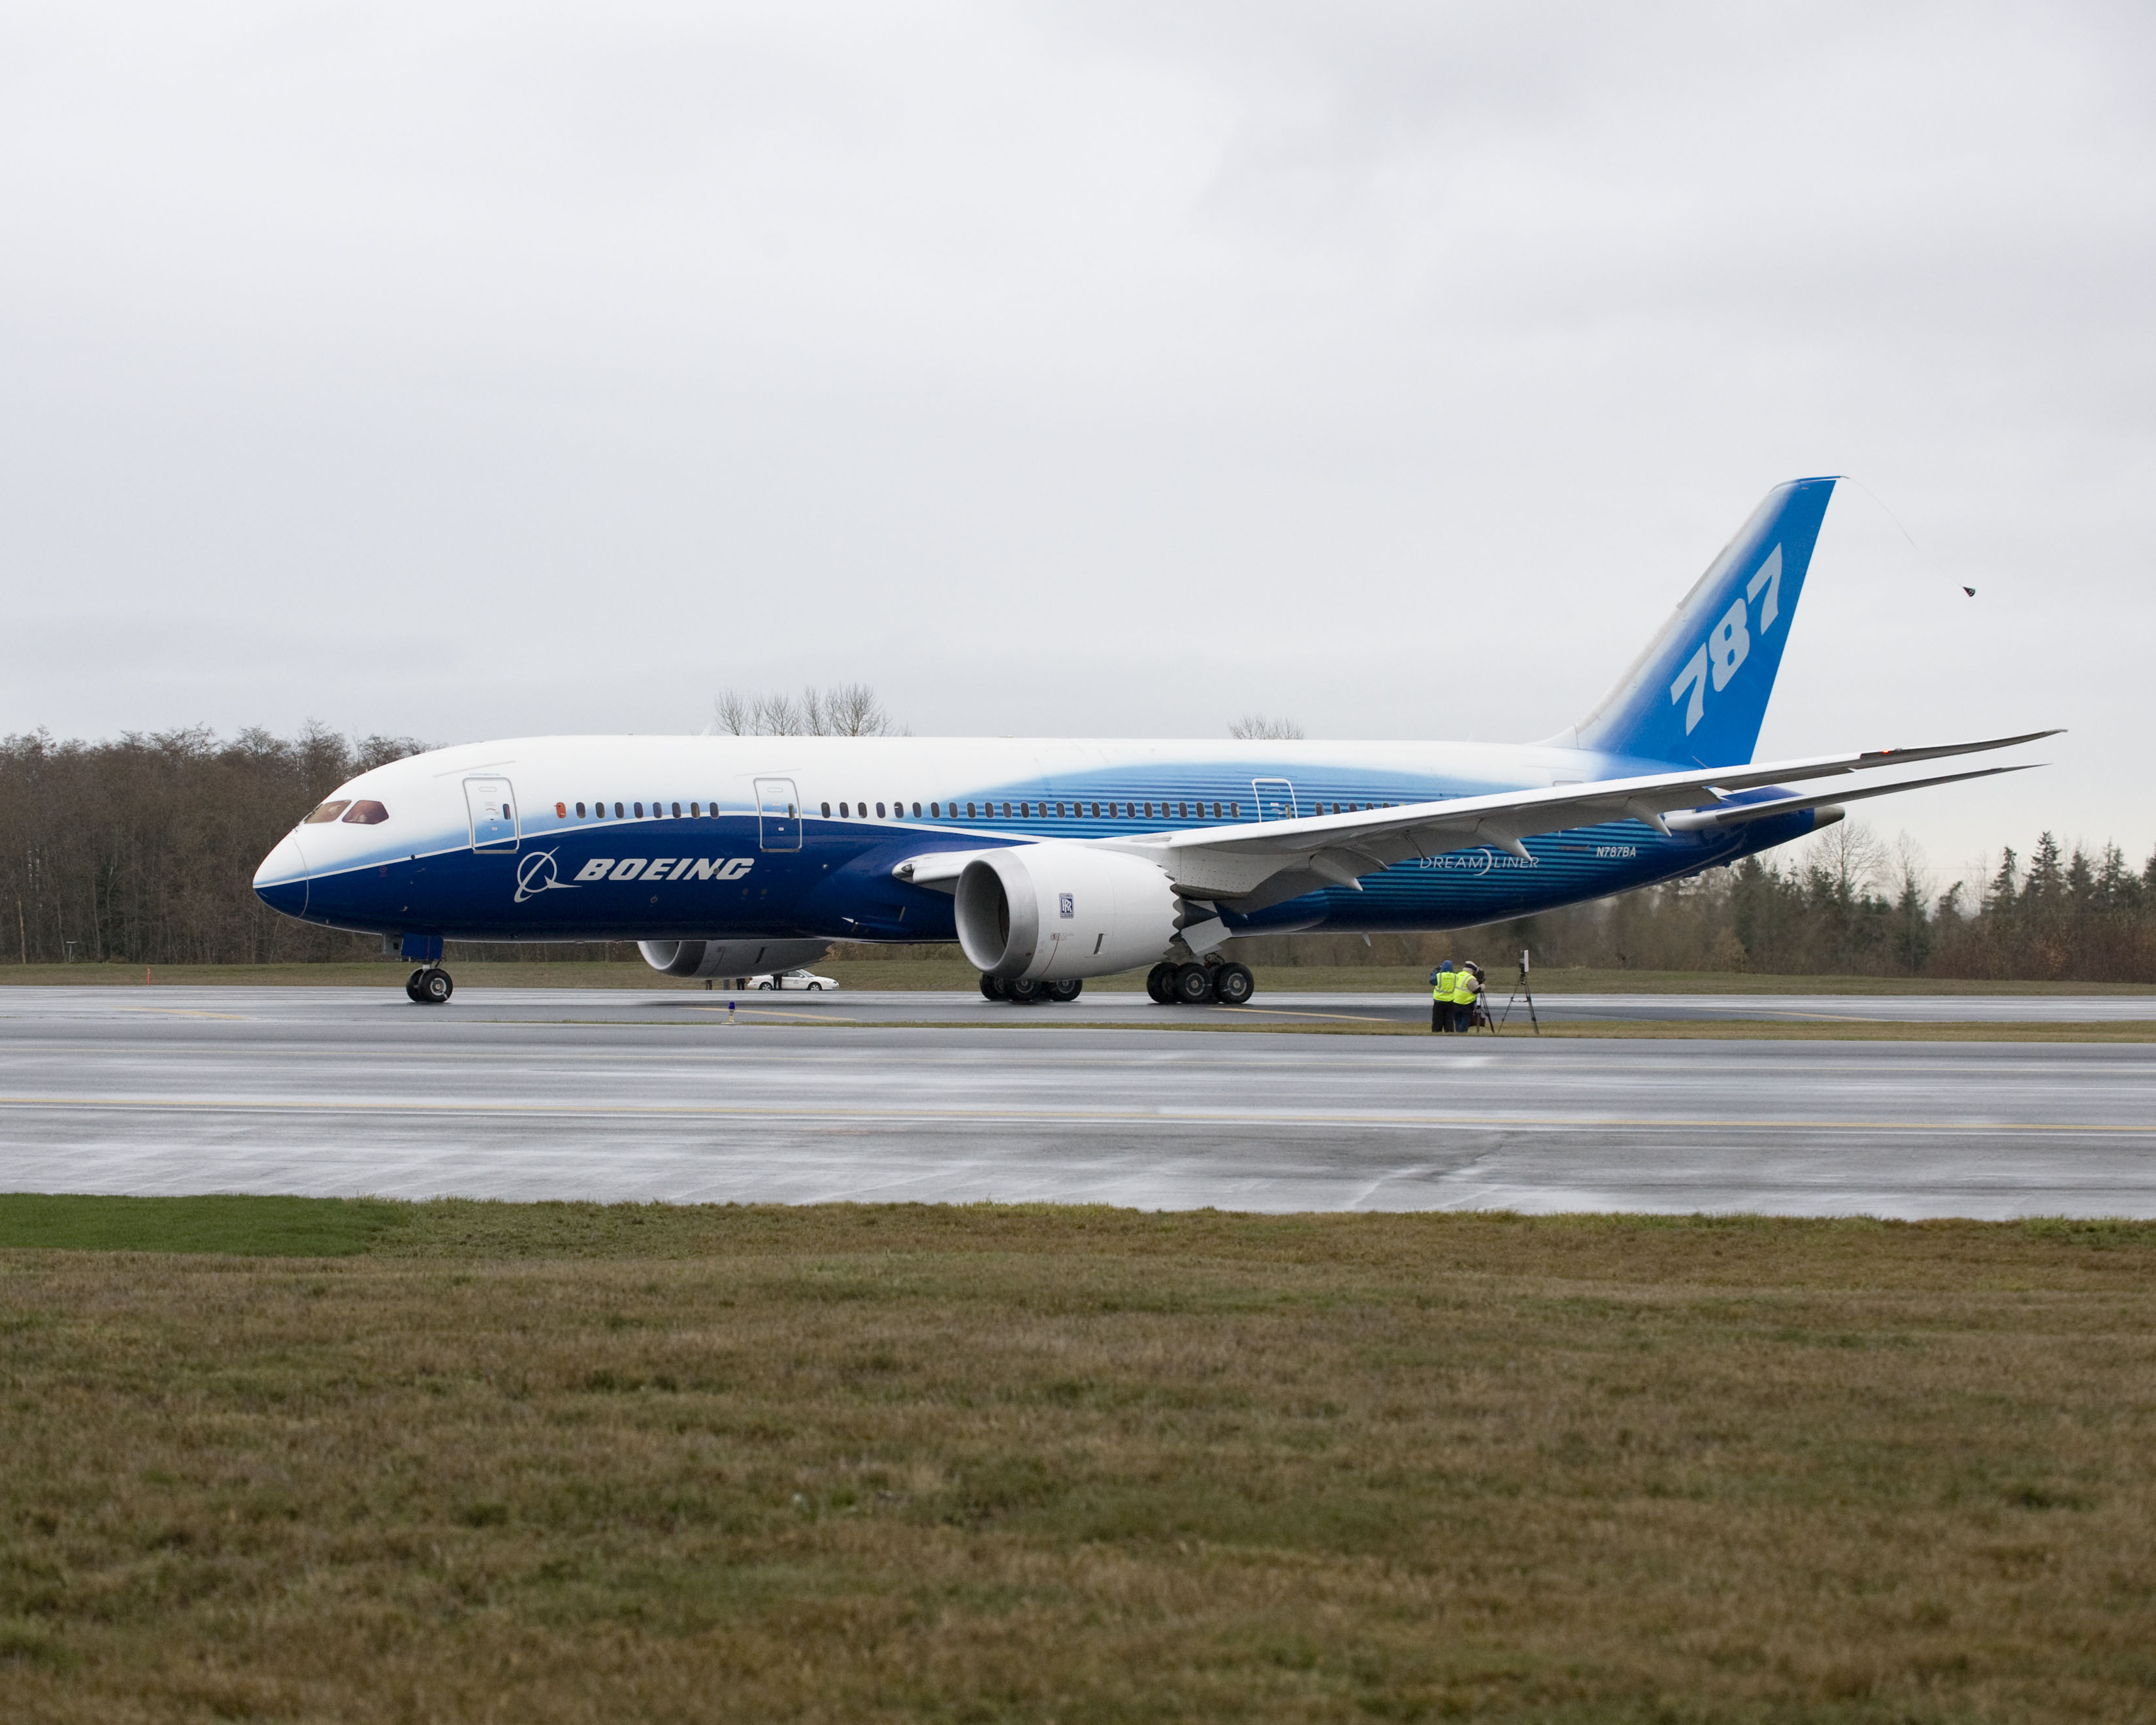 And where it all became. The Dreamliner livery seen on ZA001 on her maiden flight. Image by The Boeing Company.